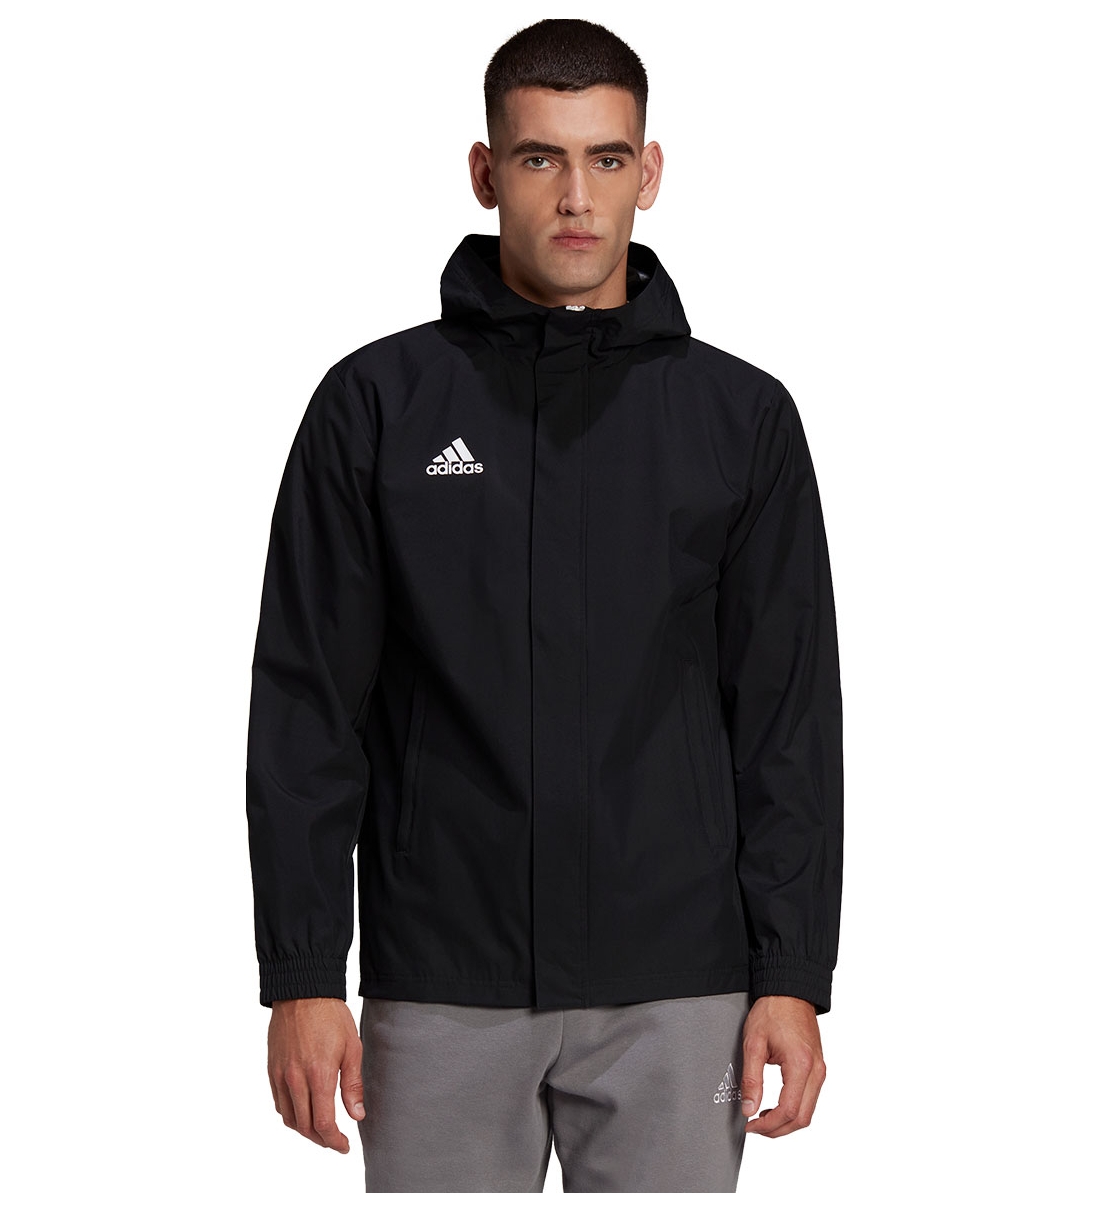 Adidas Ss22 Entrada 22 All-Weather Jacket HB0581 - OHmyTAGS.com